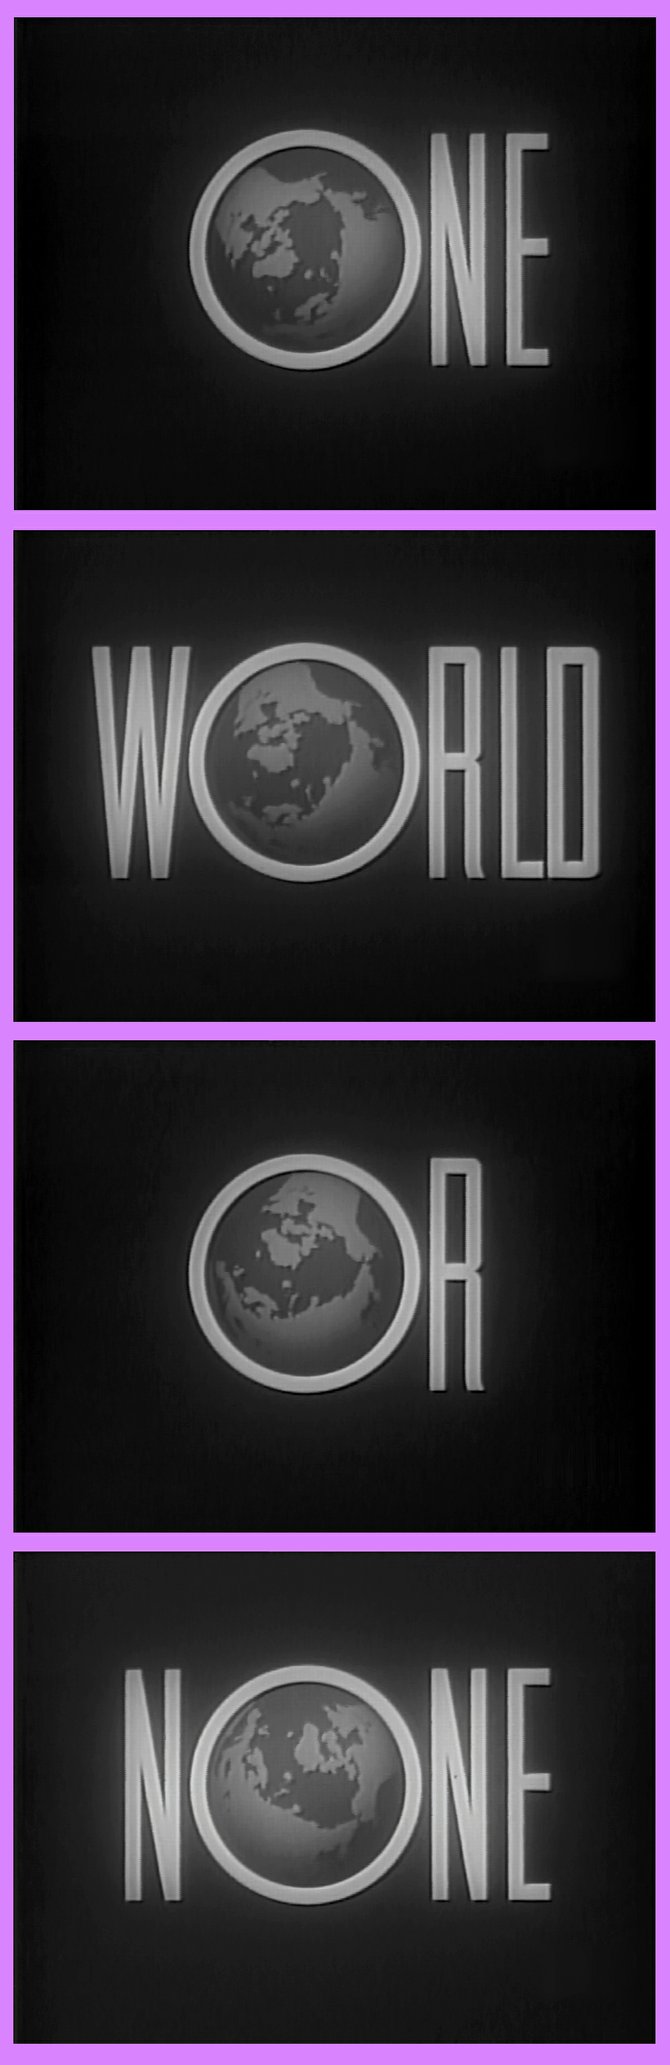 From the 1950 educational short, "One World or None."